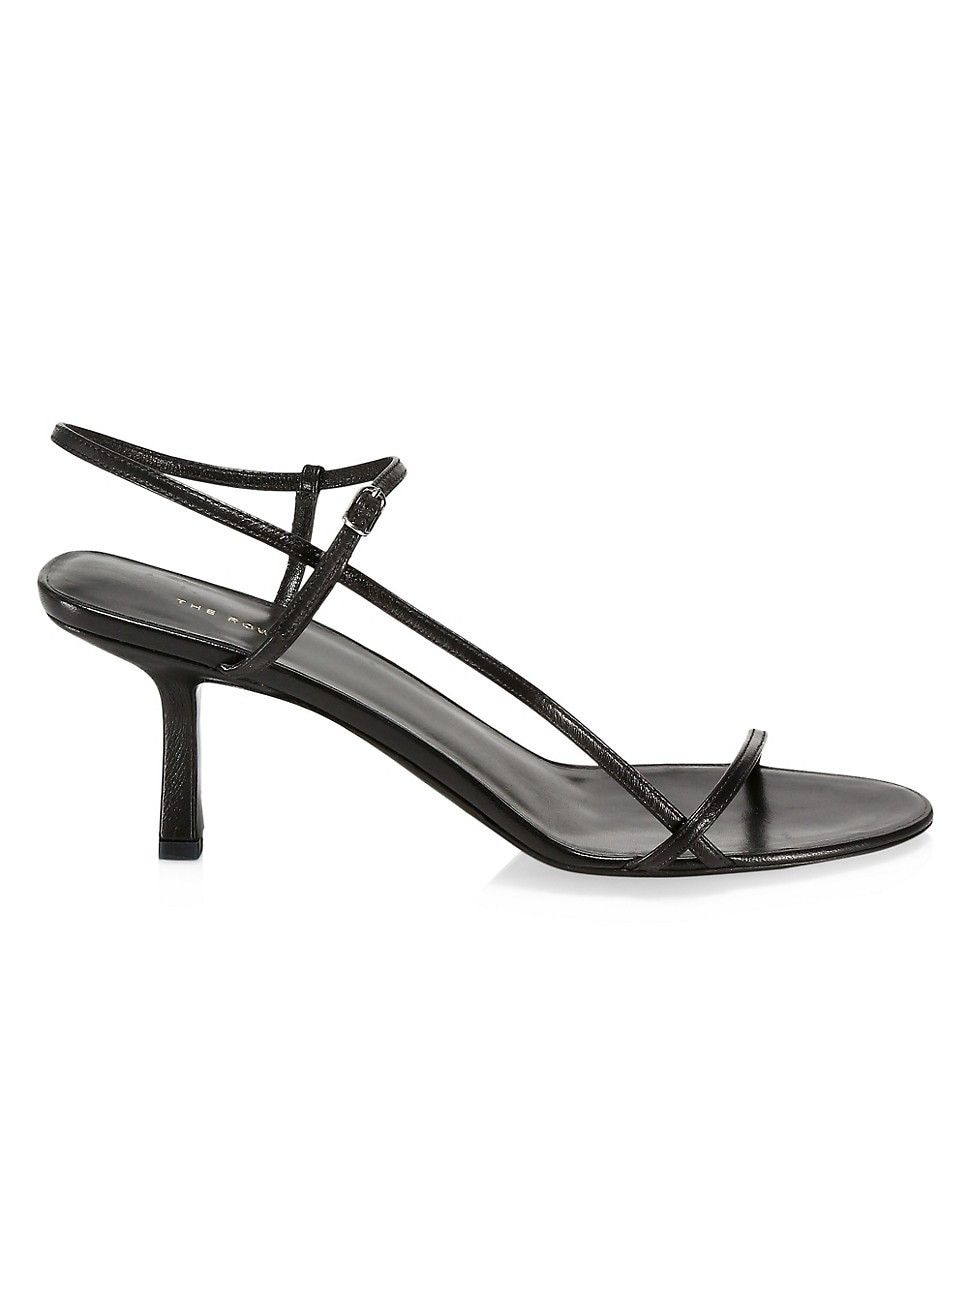 Bare Leather Sandals | Saks Fifth Avenue